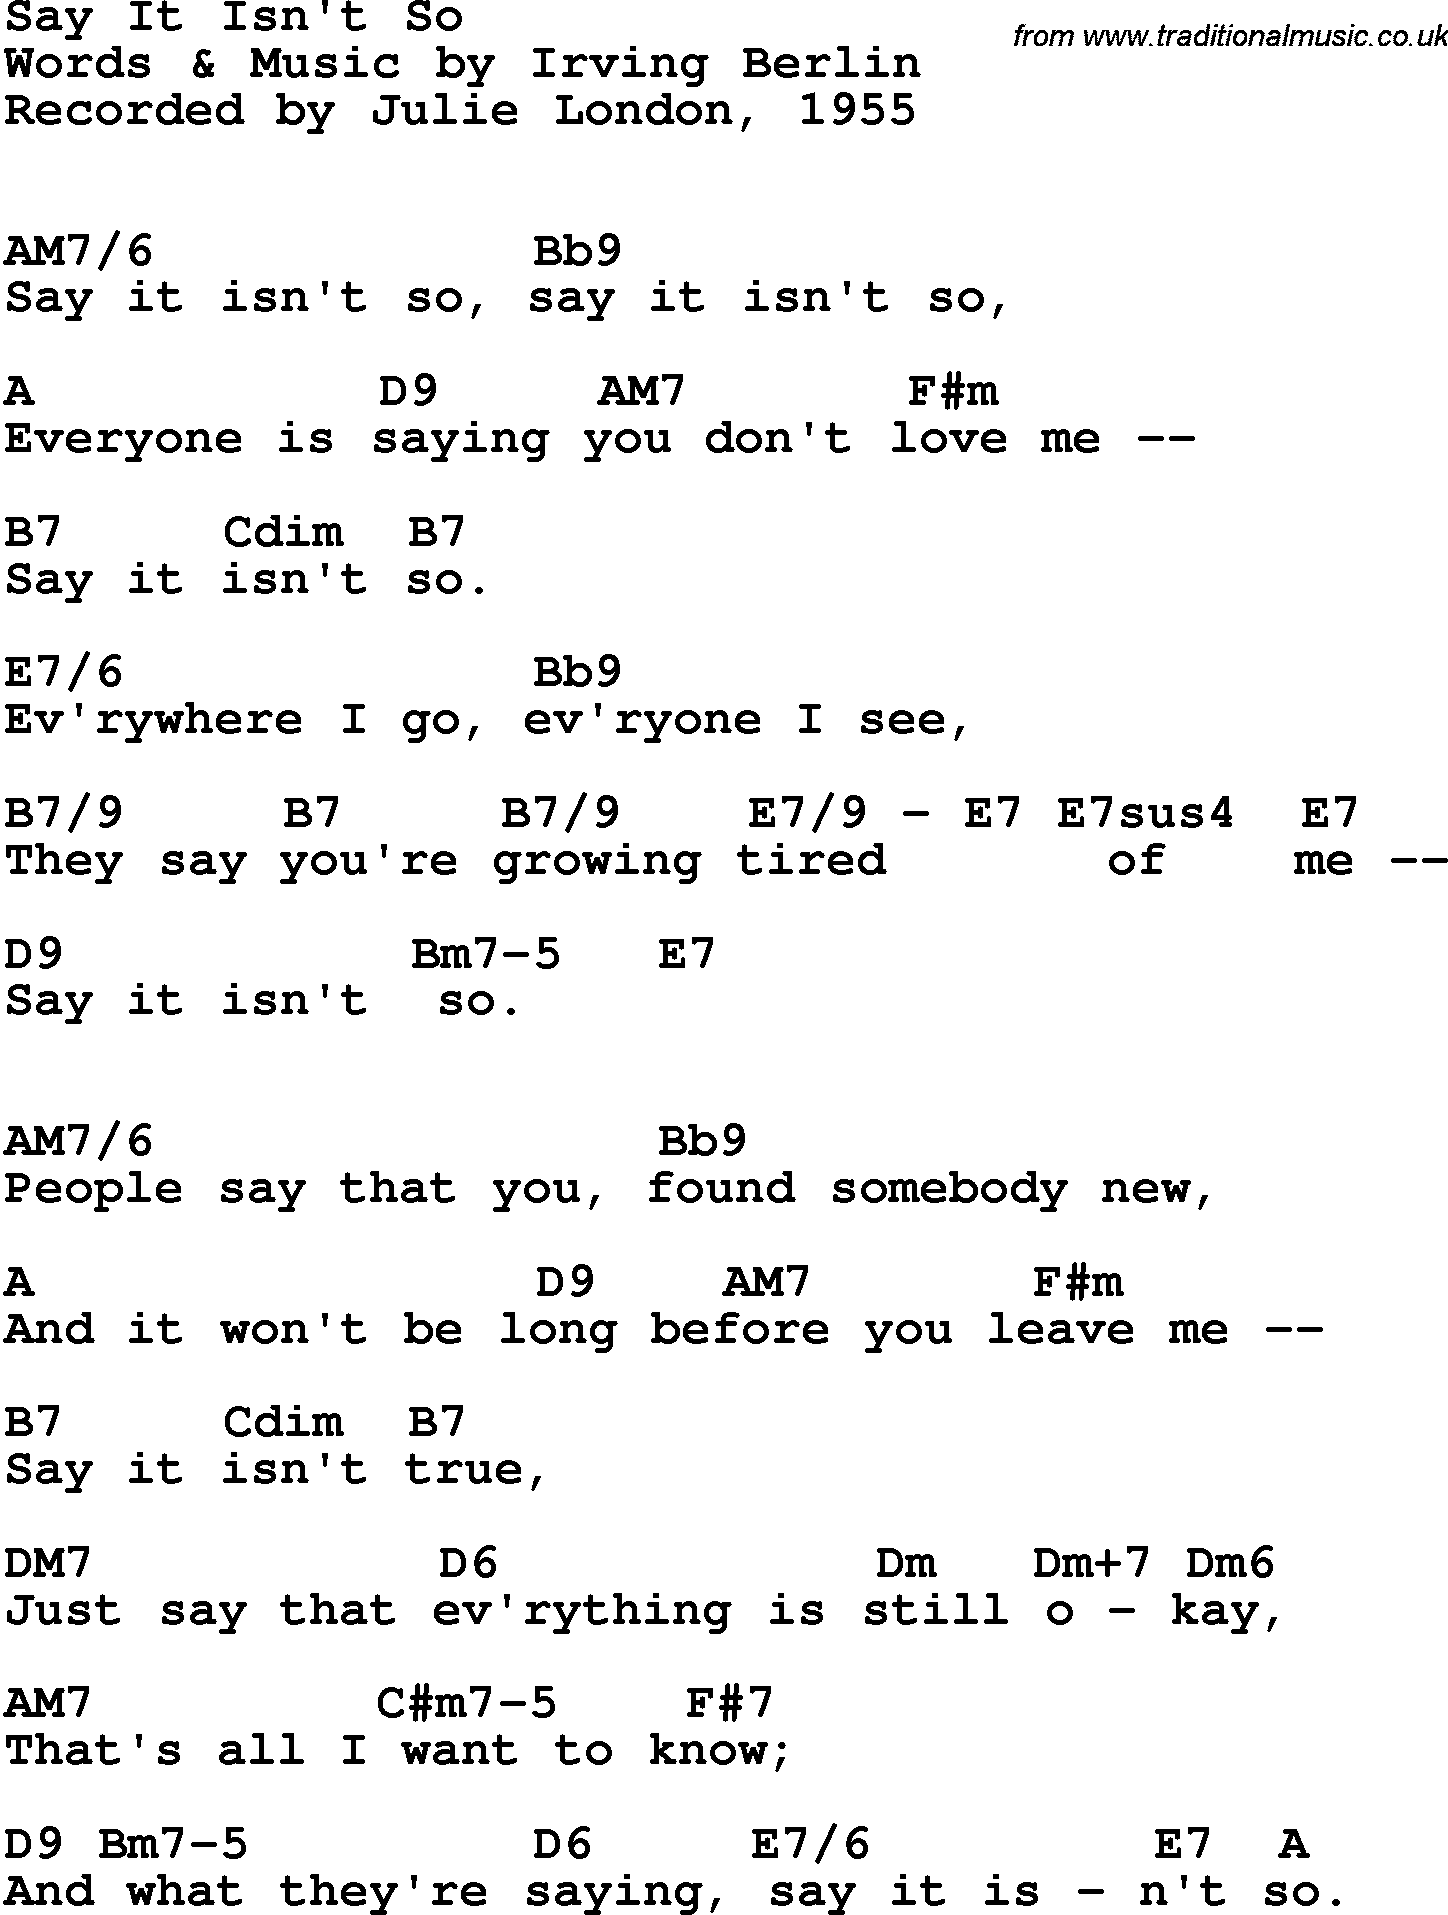 Song Lyrics with guitar chords for Say It Isn't So - Julie London, 1955